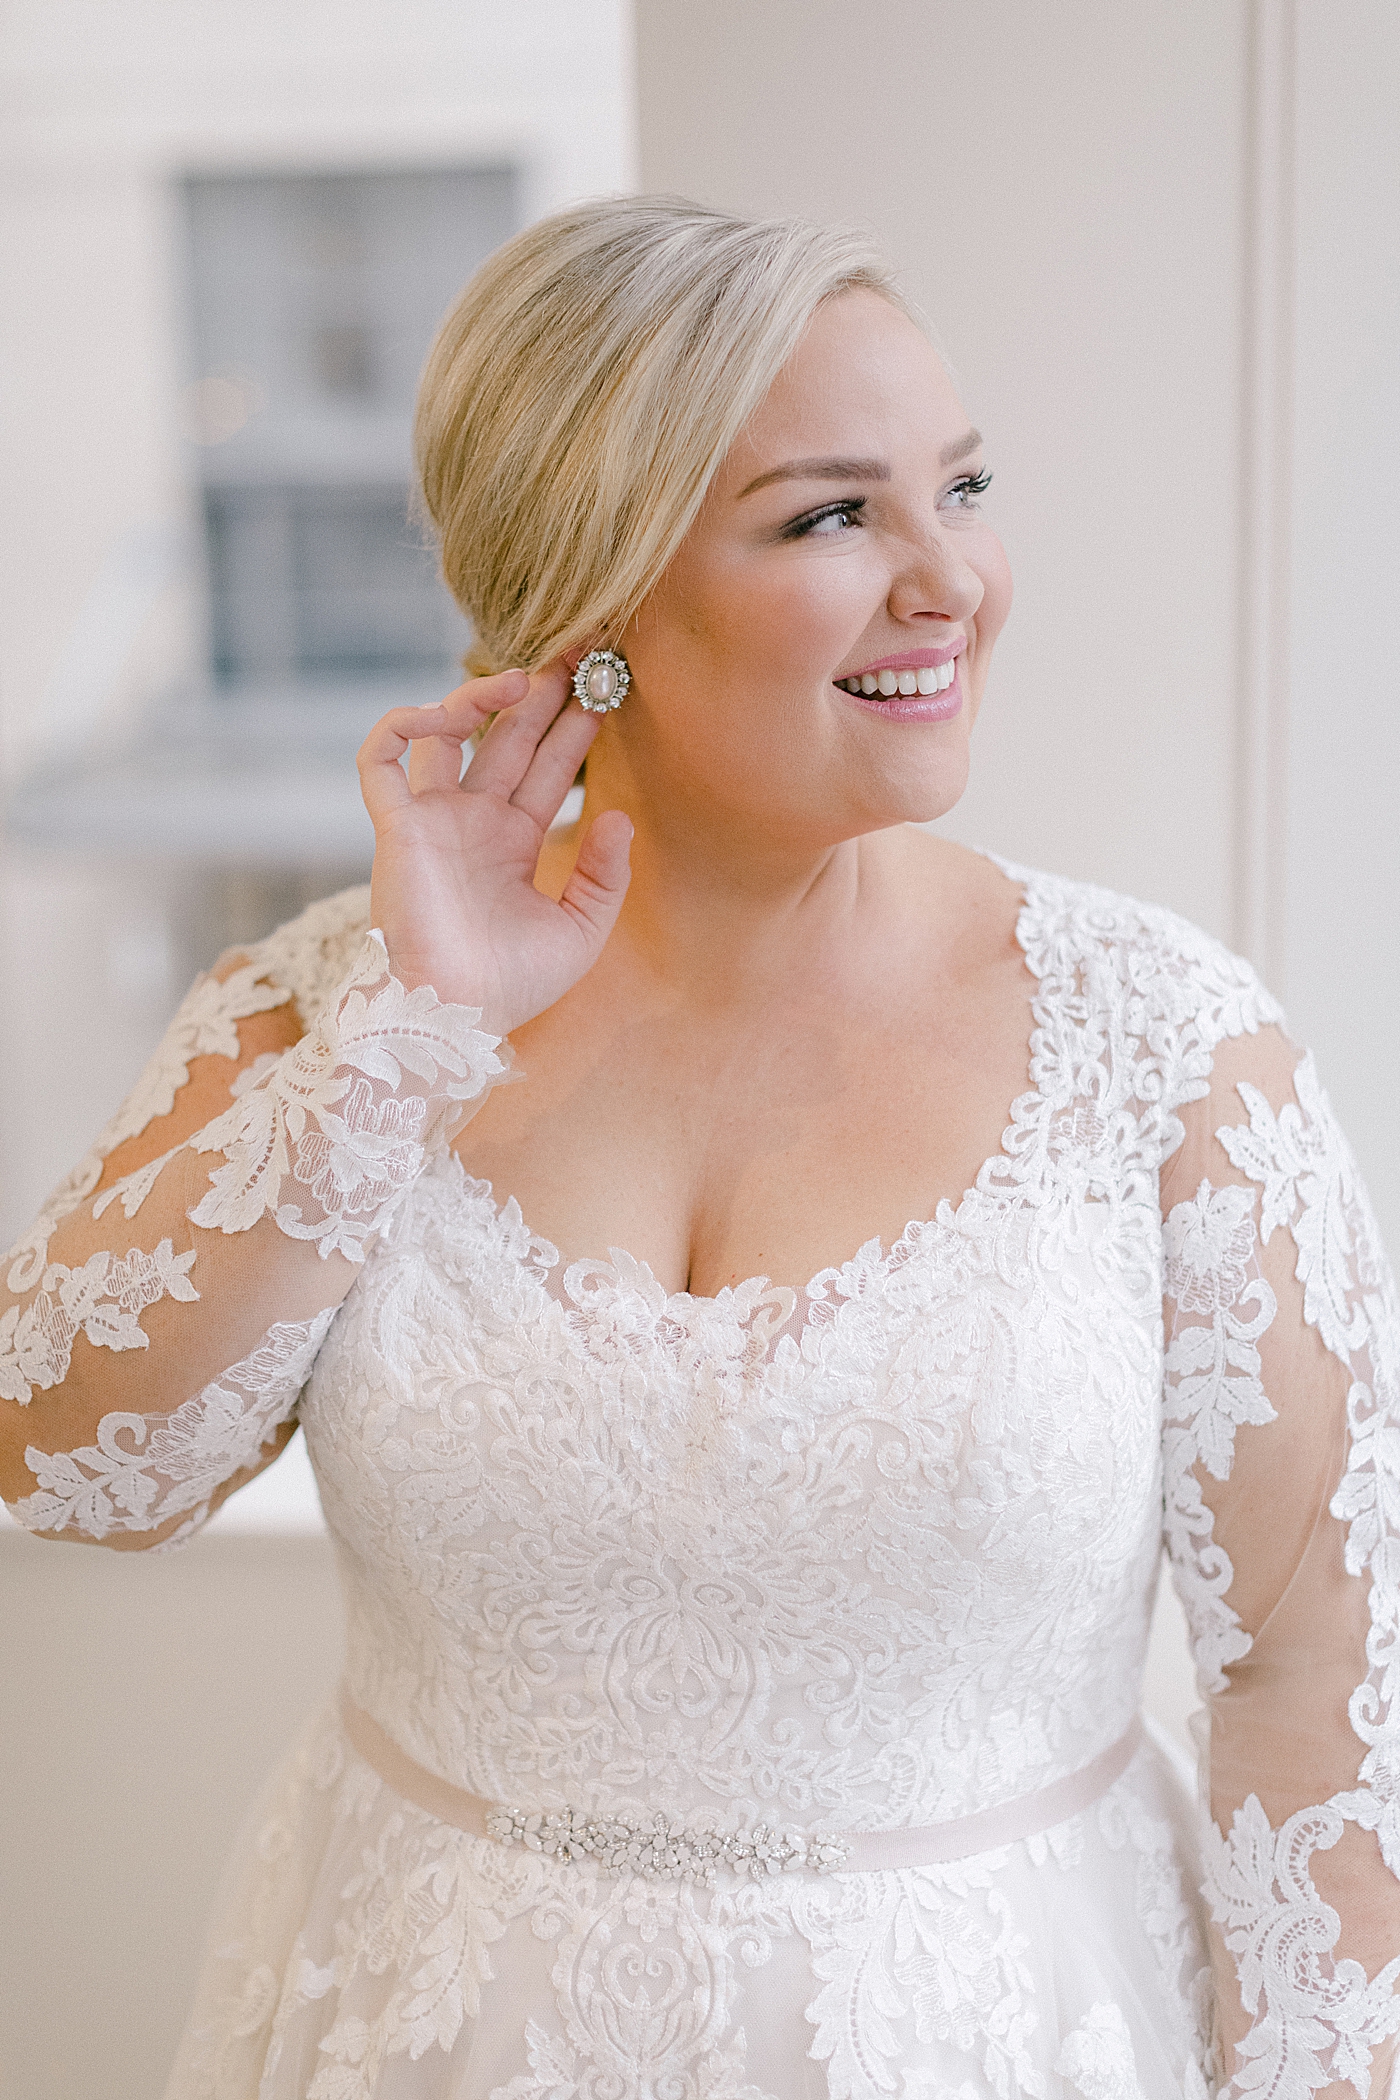 Bride putting on her earrings | Photo by Hope Helmuth Photography